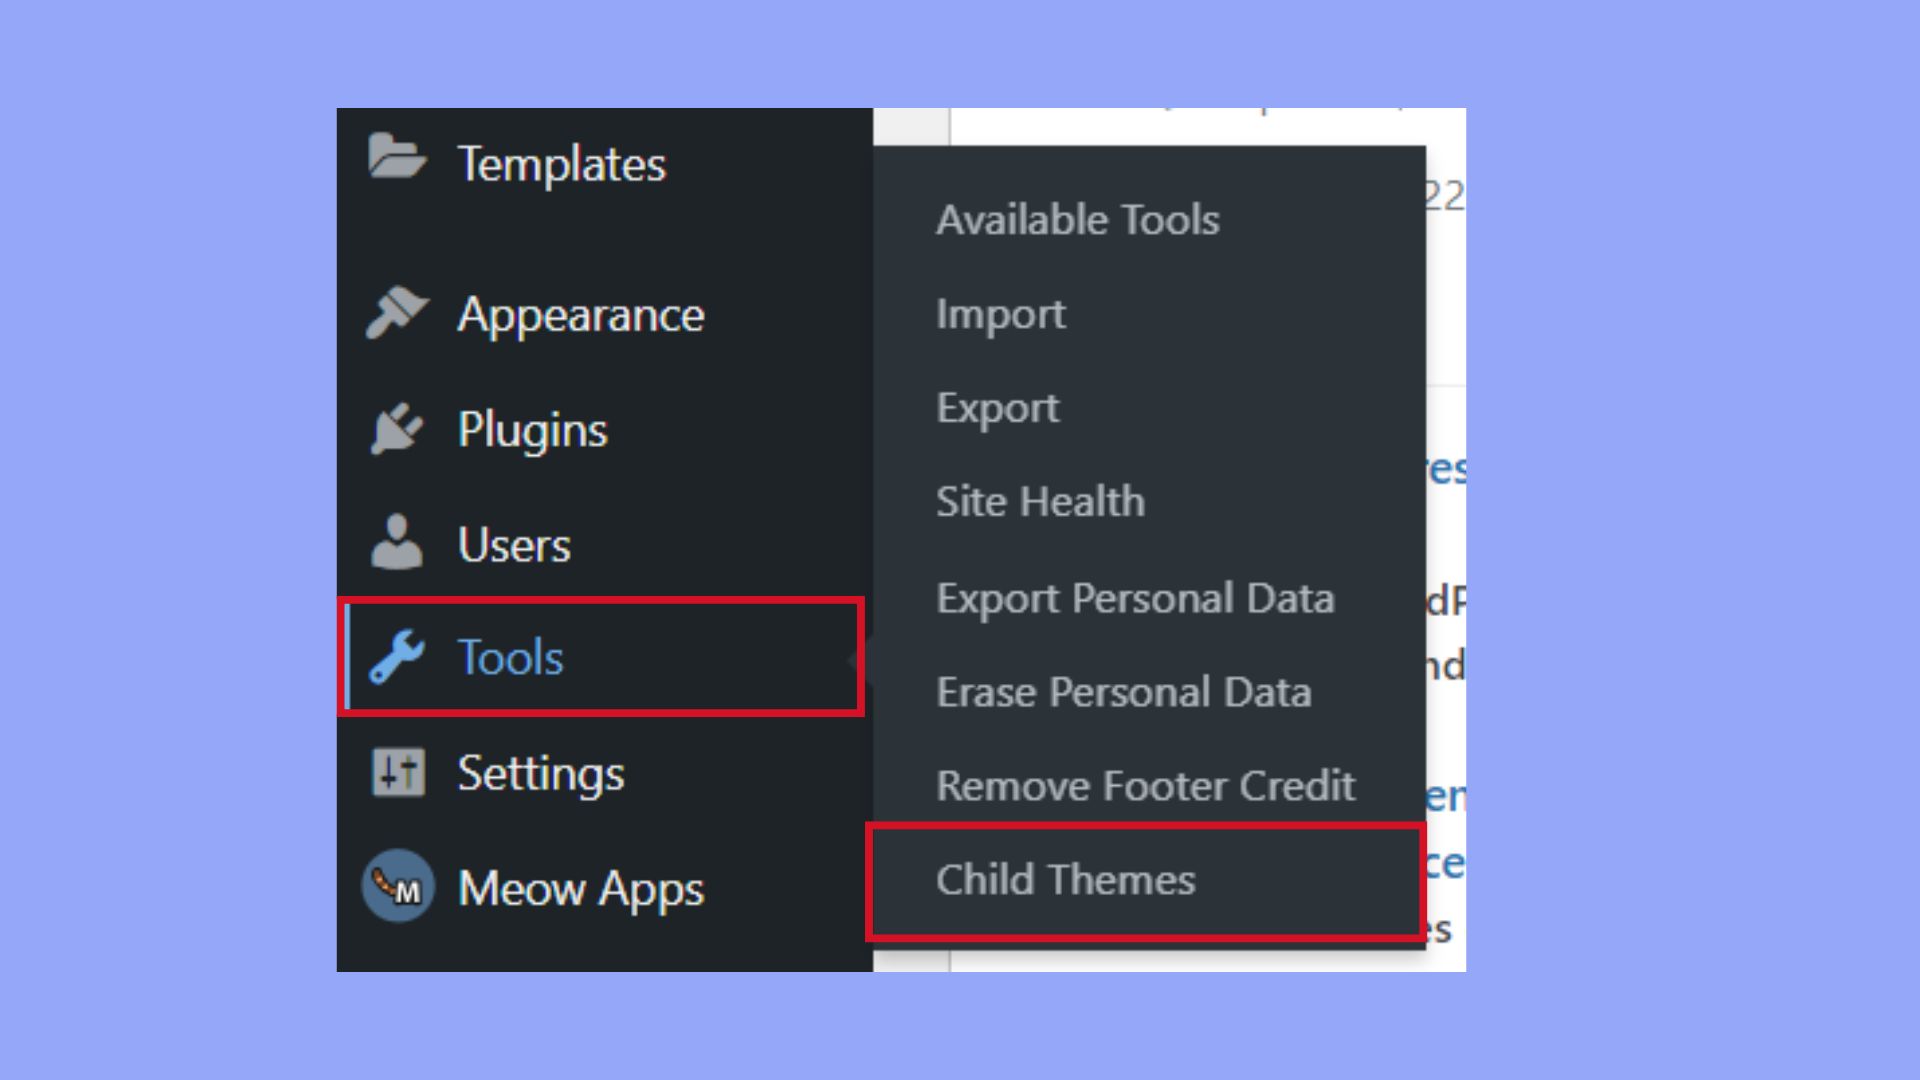 how to create a child theme in wordpress